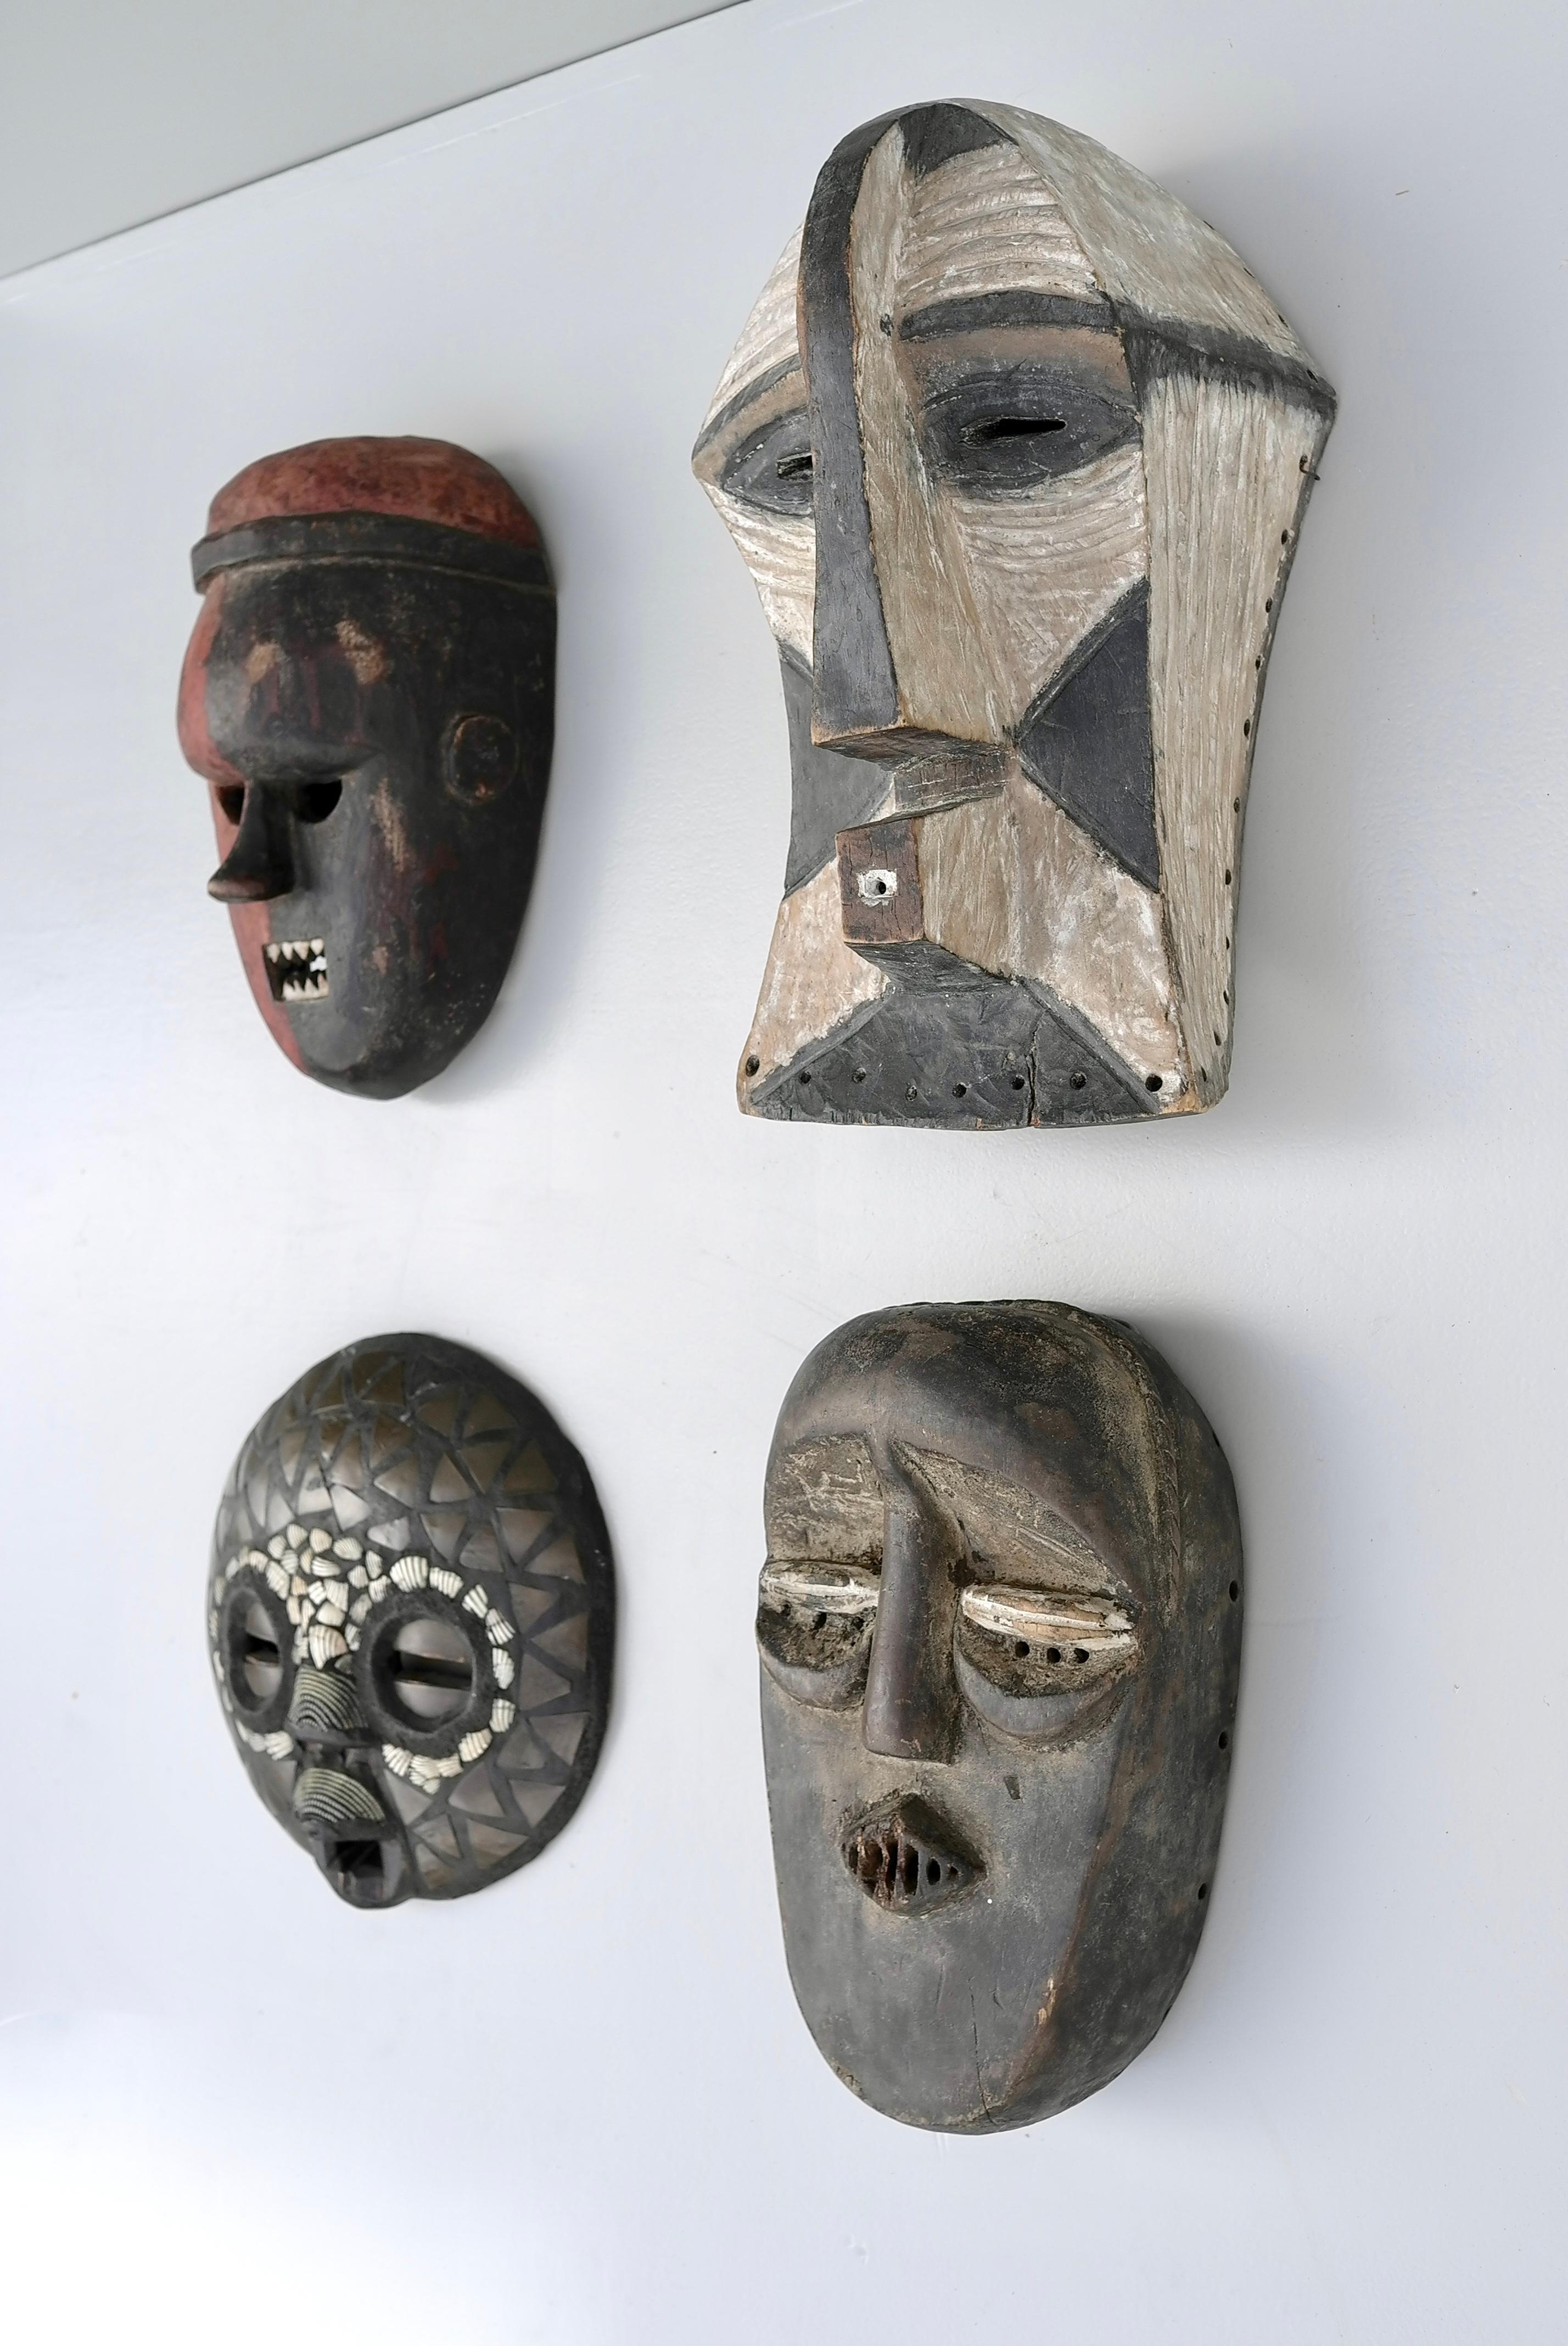 Collection of midcentury African multicolored wooden masks.

Red/brown 30cmx18cmx 12cm
Black/white 38cmx19cmx20cm
Brown 30cmx17cmx10cm
Brown/shell brass dia 28cm x6cm
